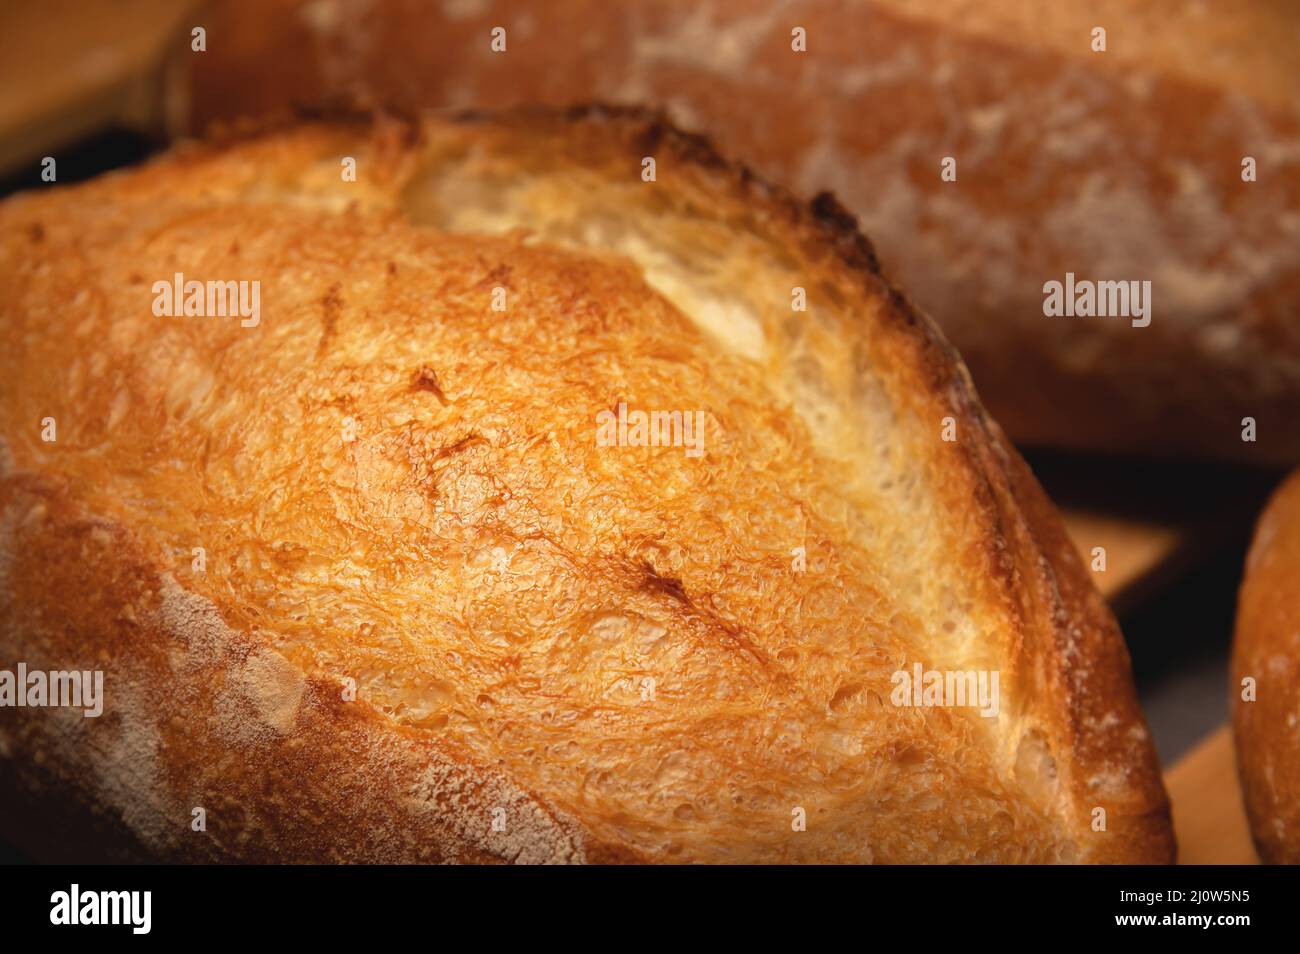 Appetizing fresh hot artisan bread. Close-up of a loaf of delicious bread on a wooden pallet Stock Photo